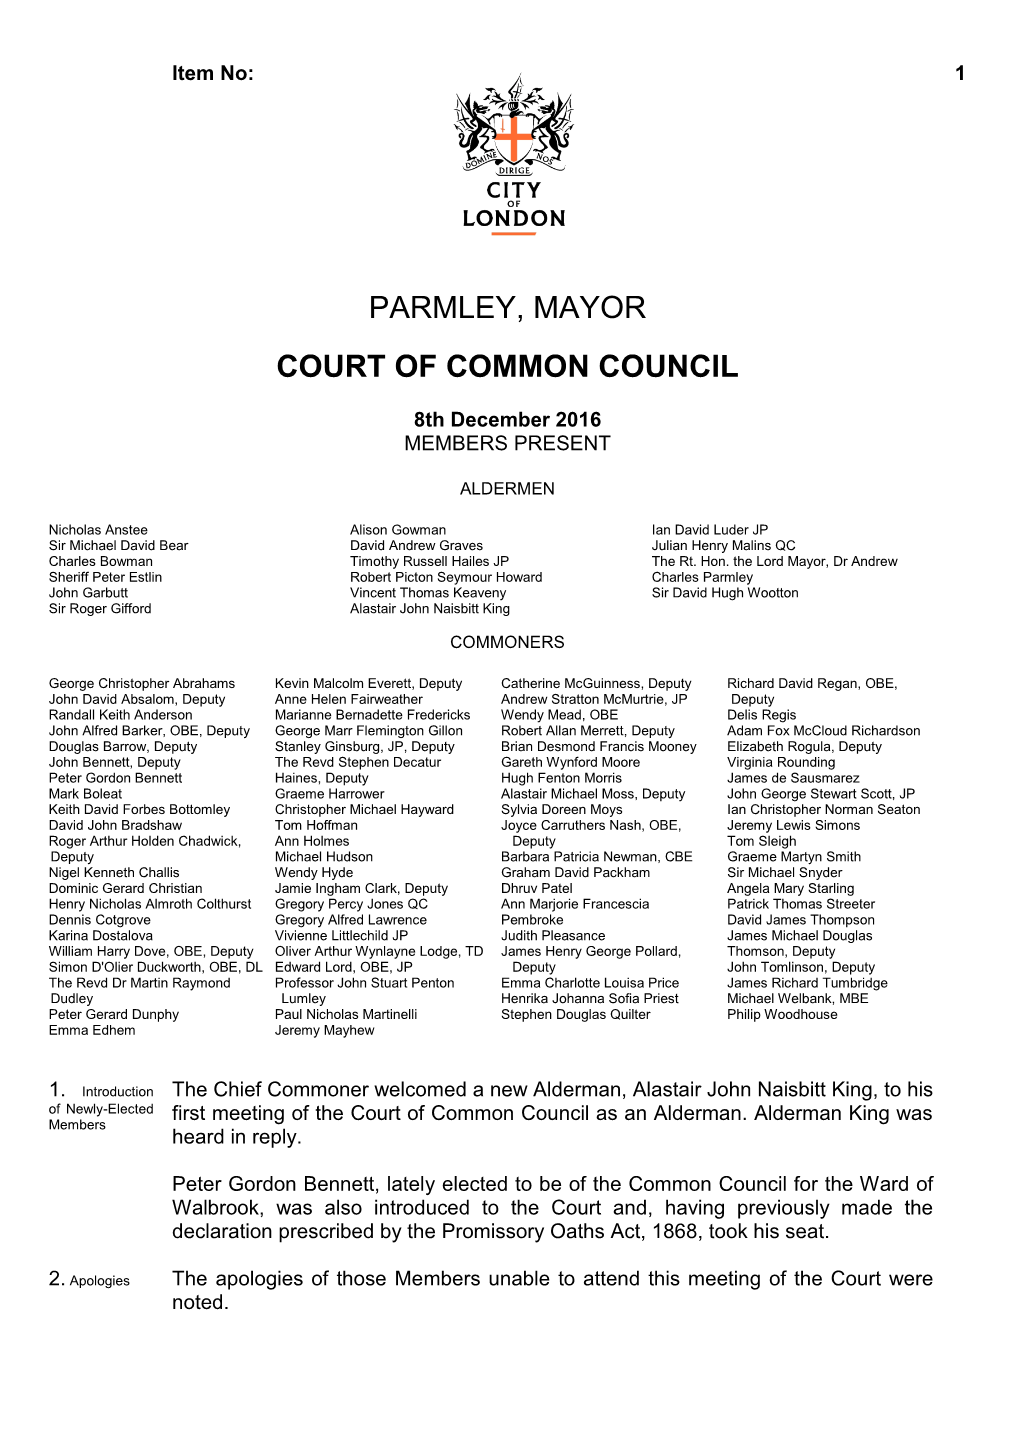 Parmley, Mayor Court of Common Council